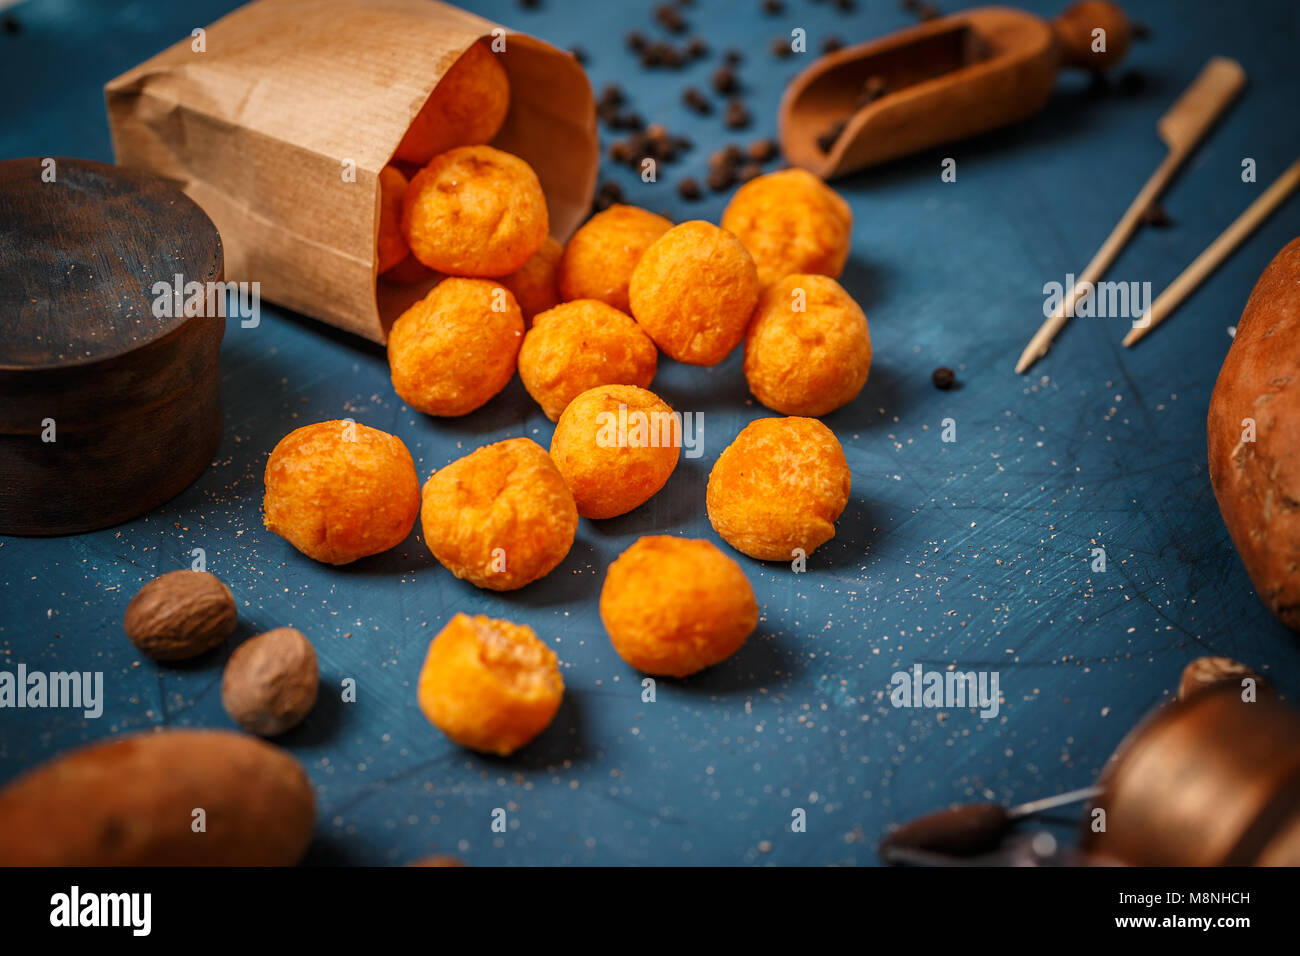 Sweet potato croquettes in a paper bag on blue background Stock Photo